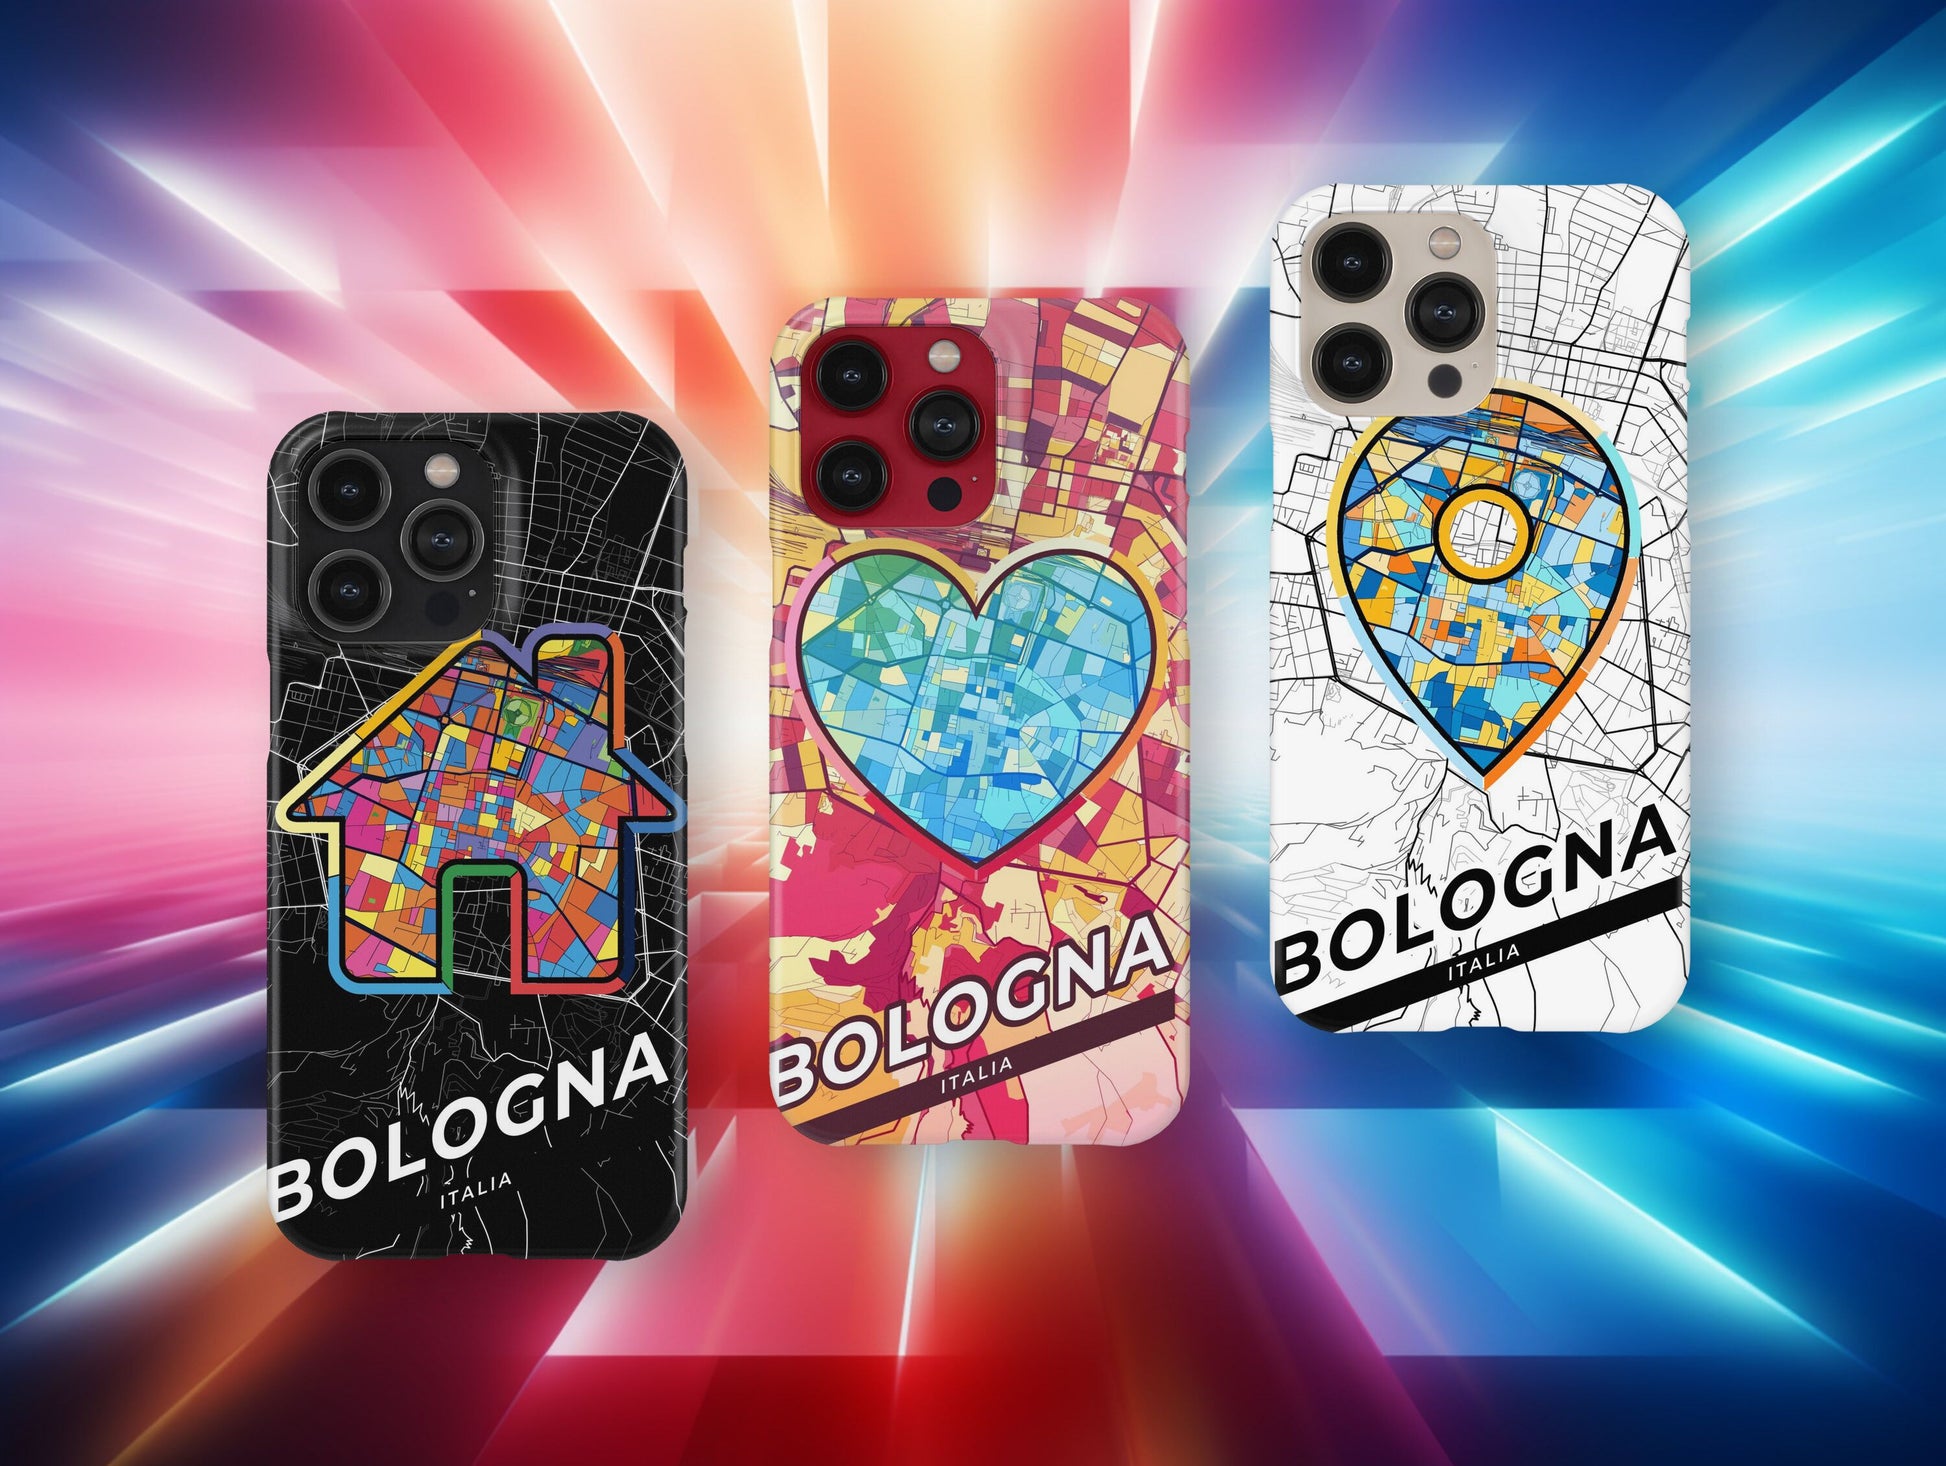 Bologna Italy slim phone case with colorful icon. Birthday, wedding or housewarming gift. Couple match cases.